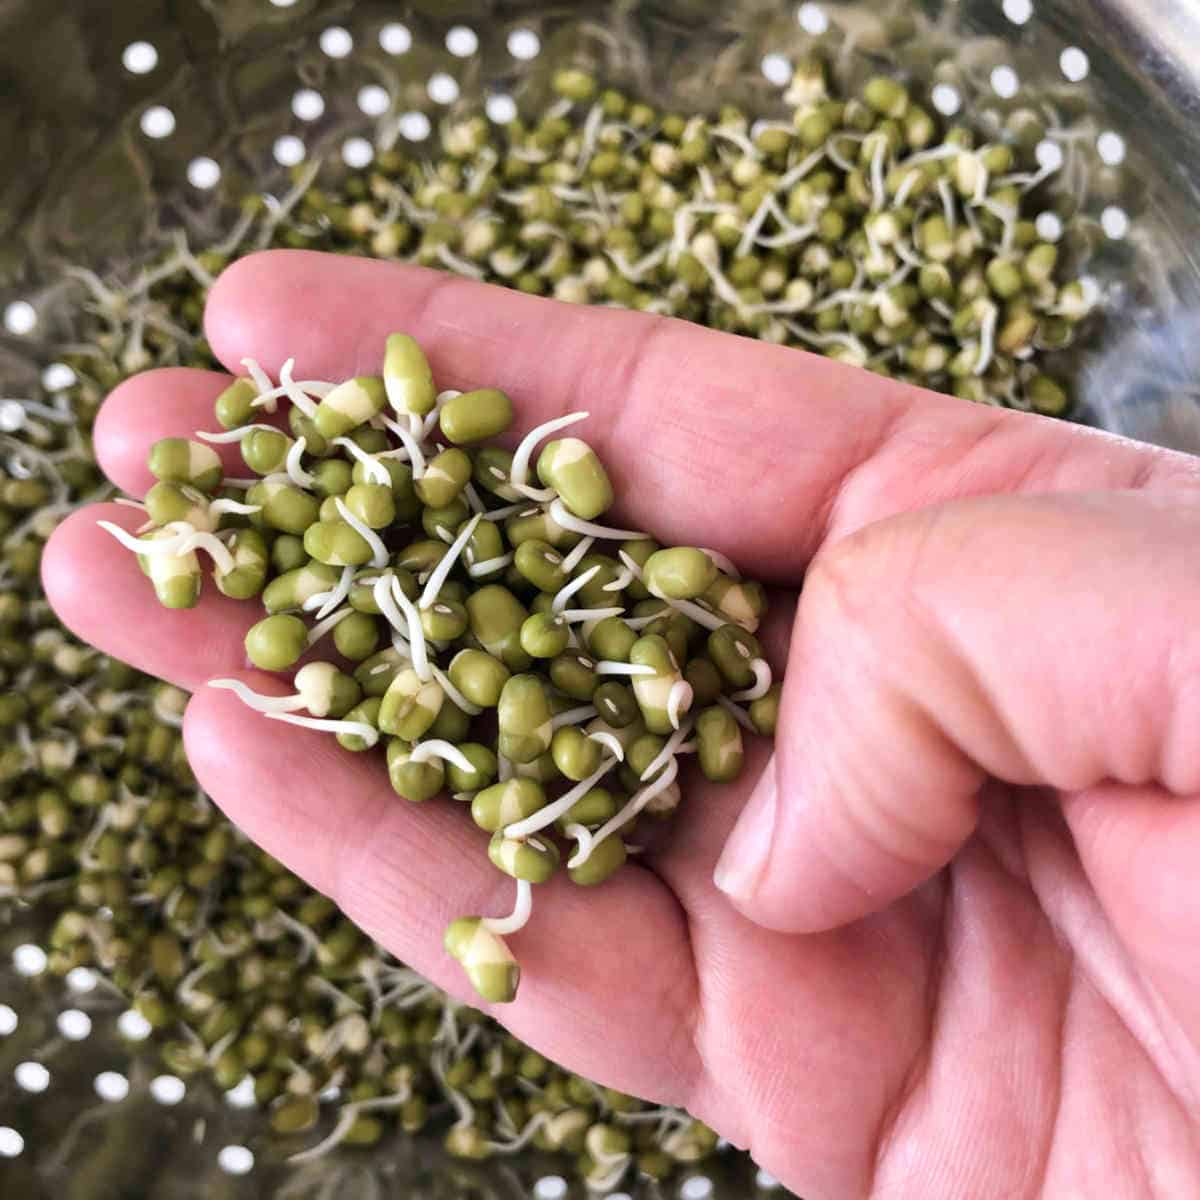 Mung beans with small sprouts on day 2.